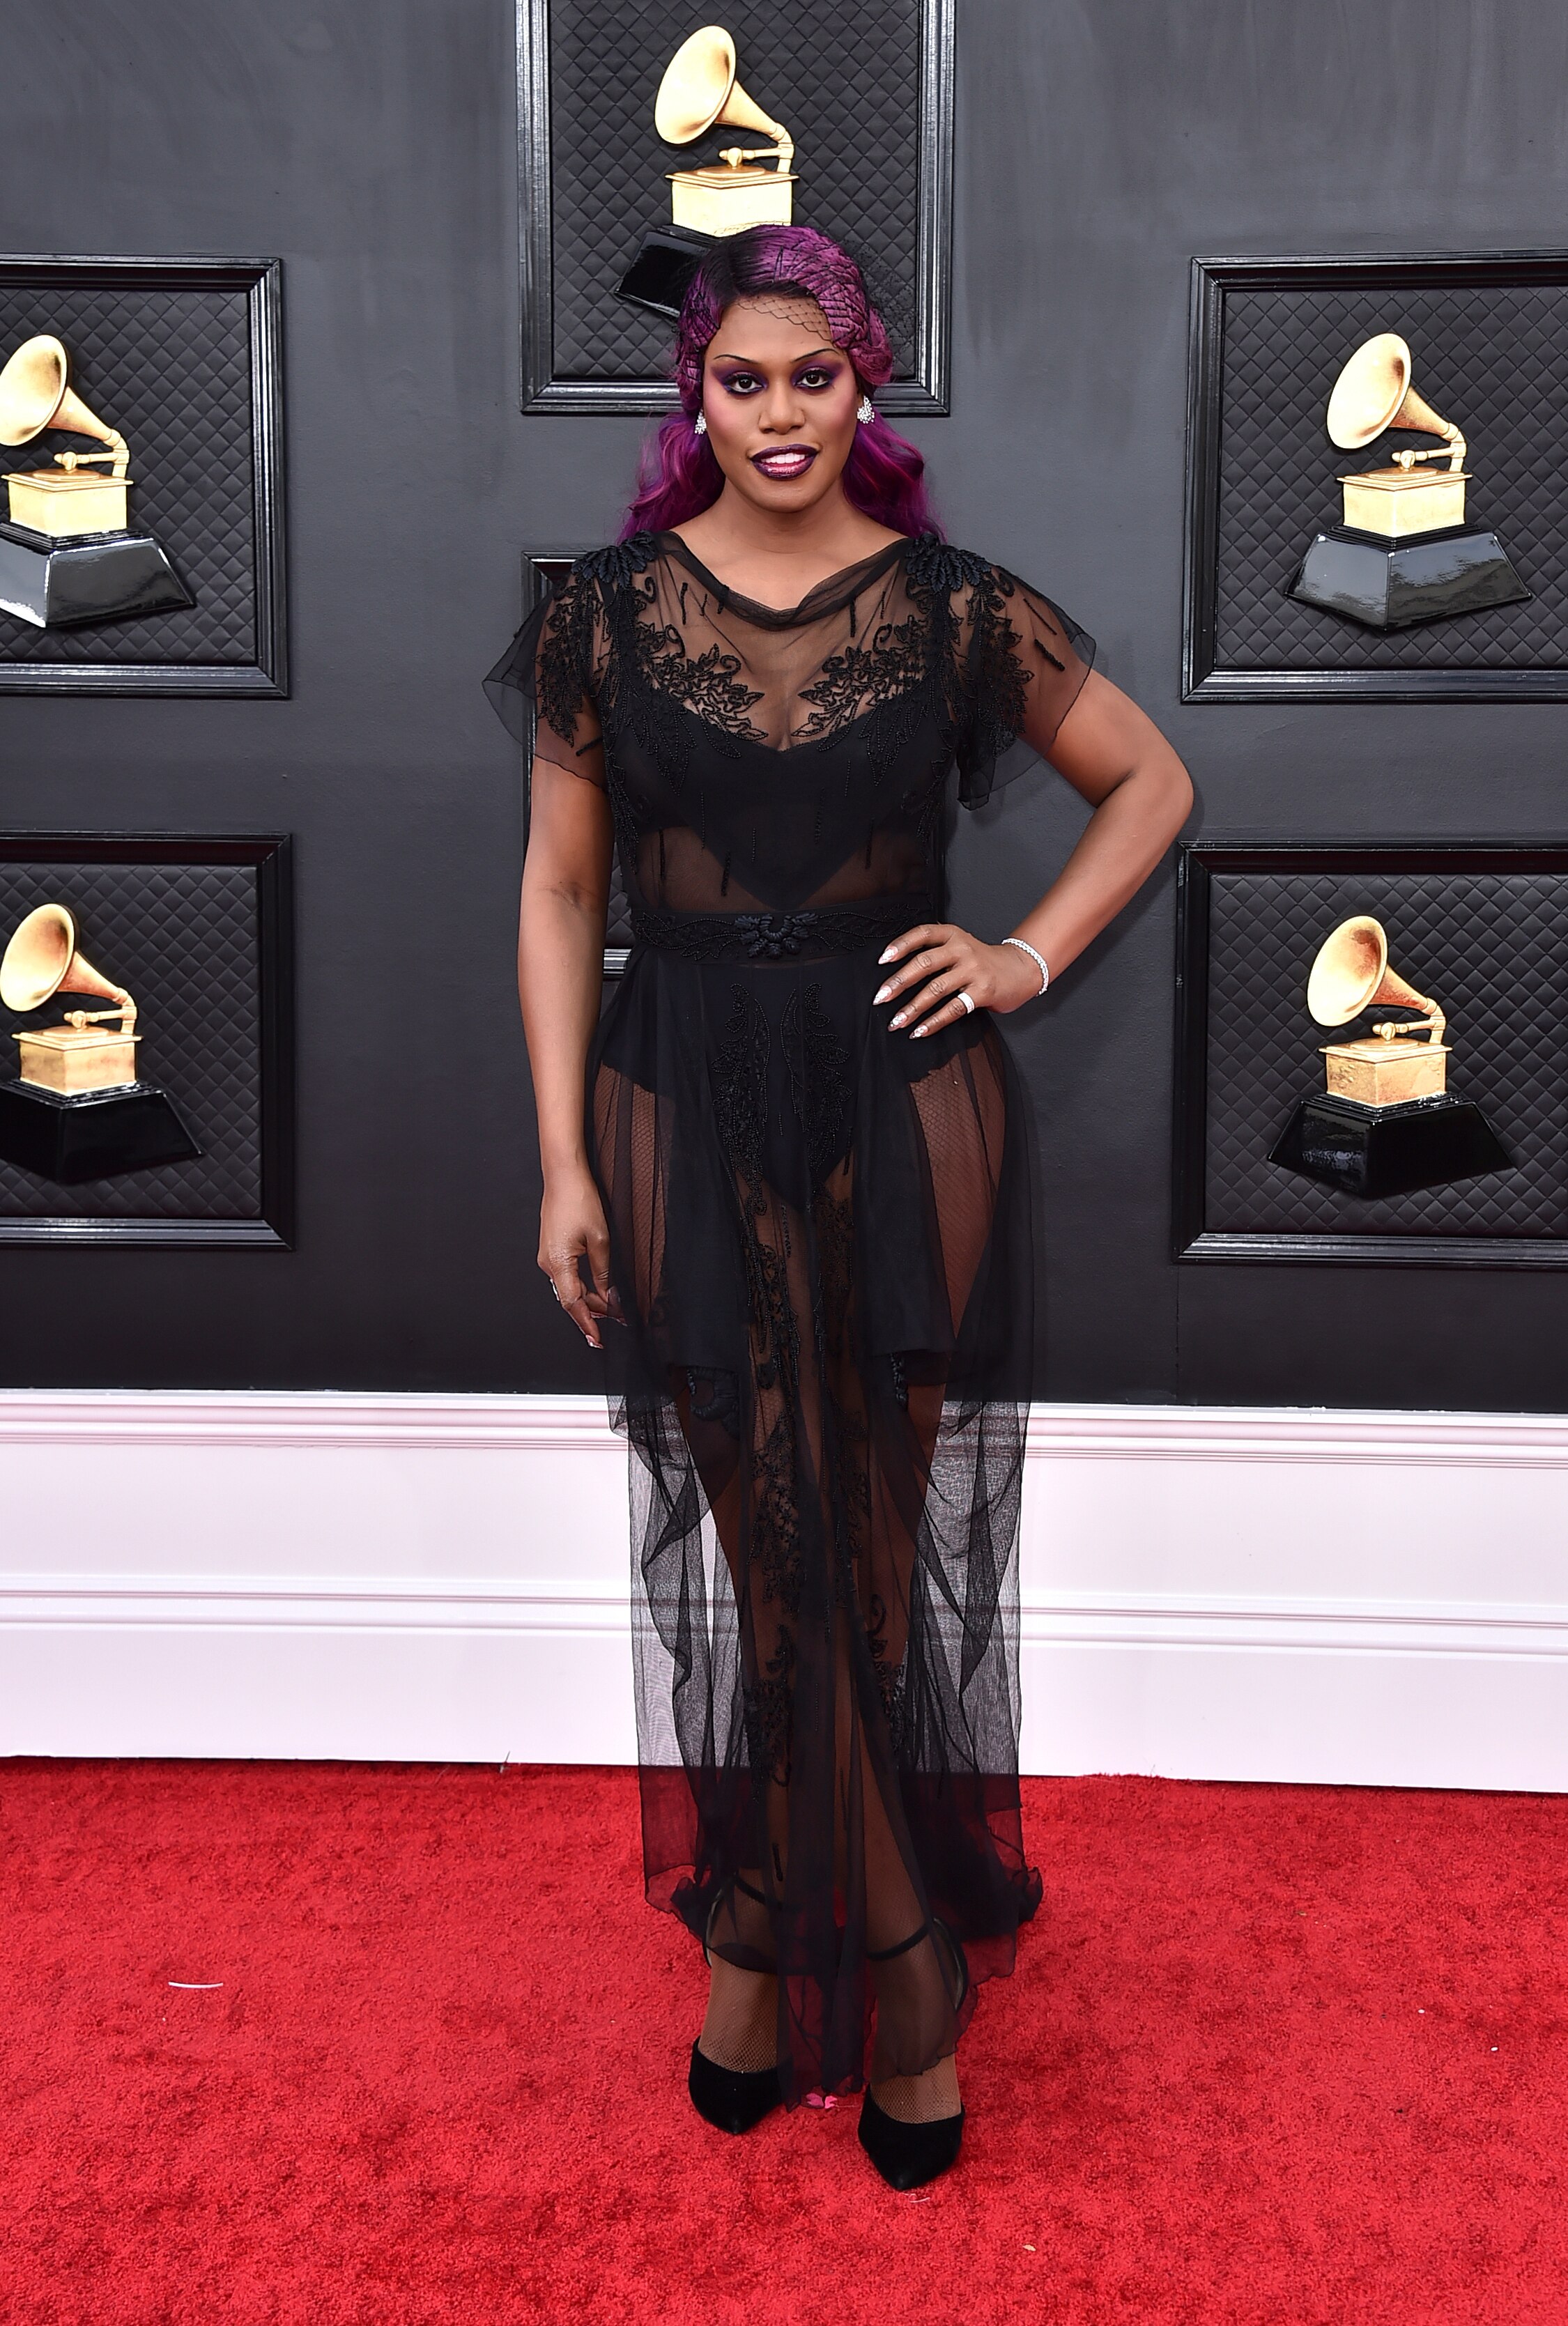 laverne cox poses on the grammys red carpet wearing a sheer black dress with lace accents and a black mesh headpiece